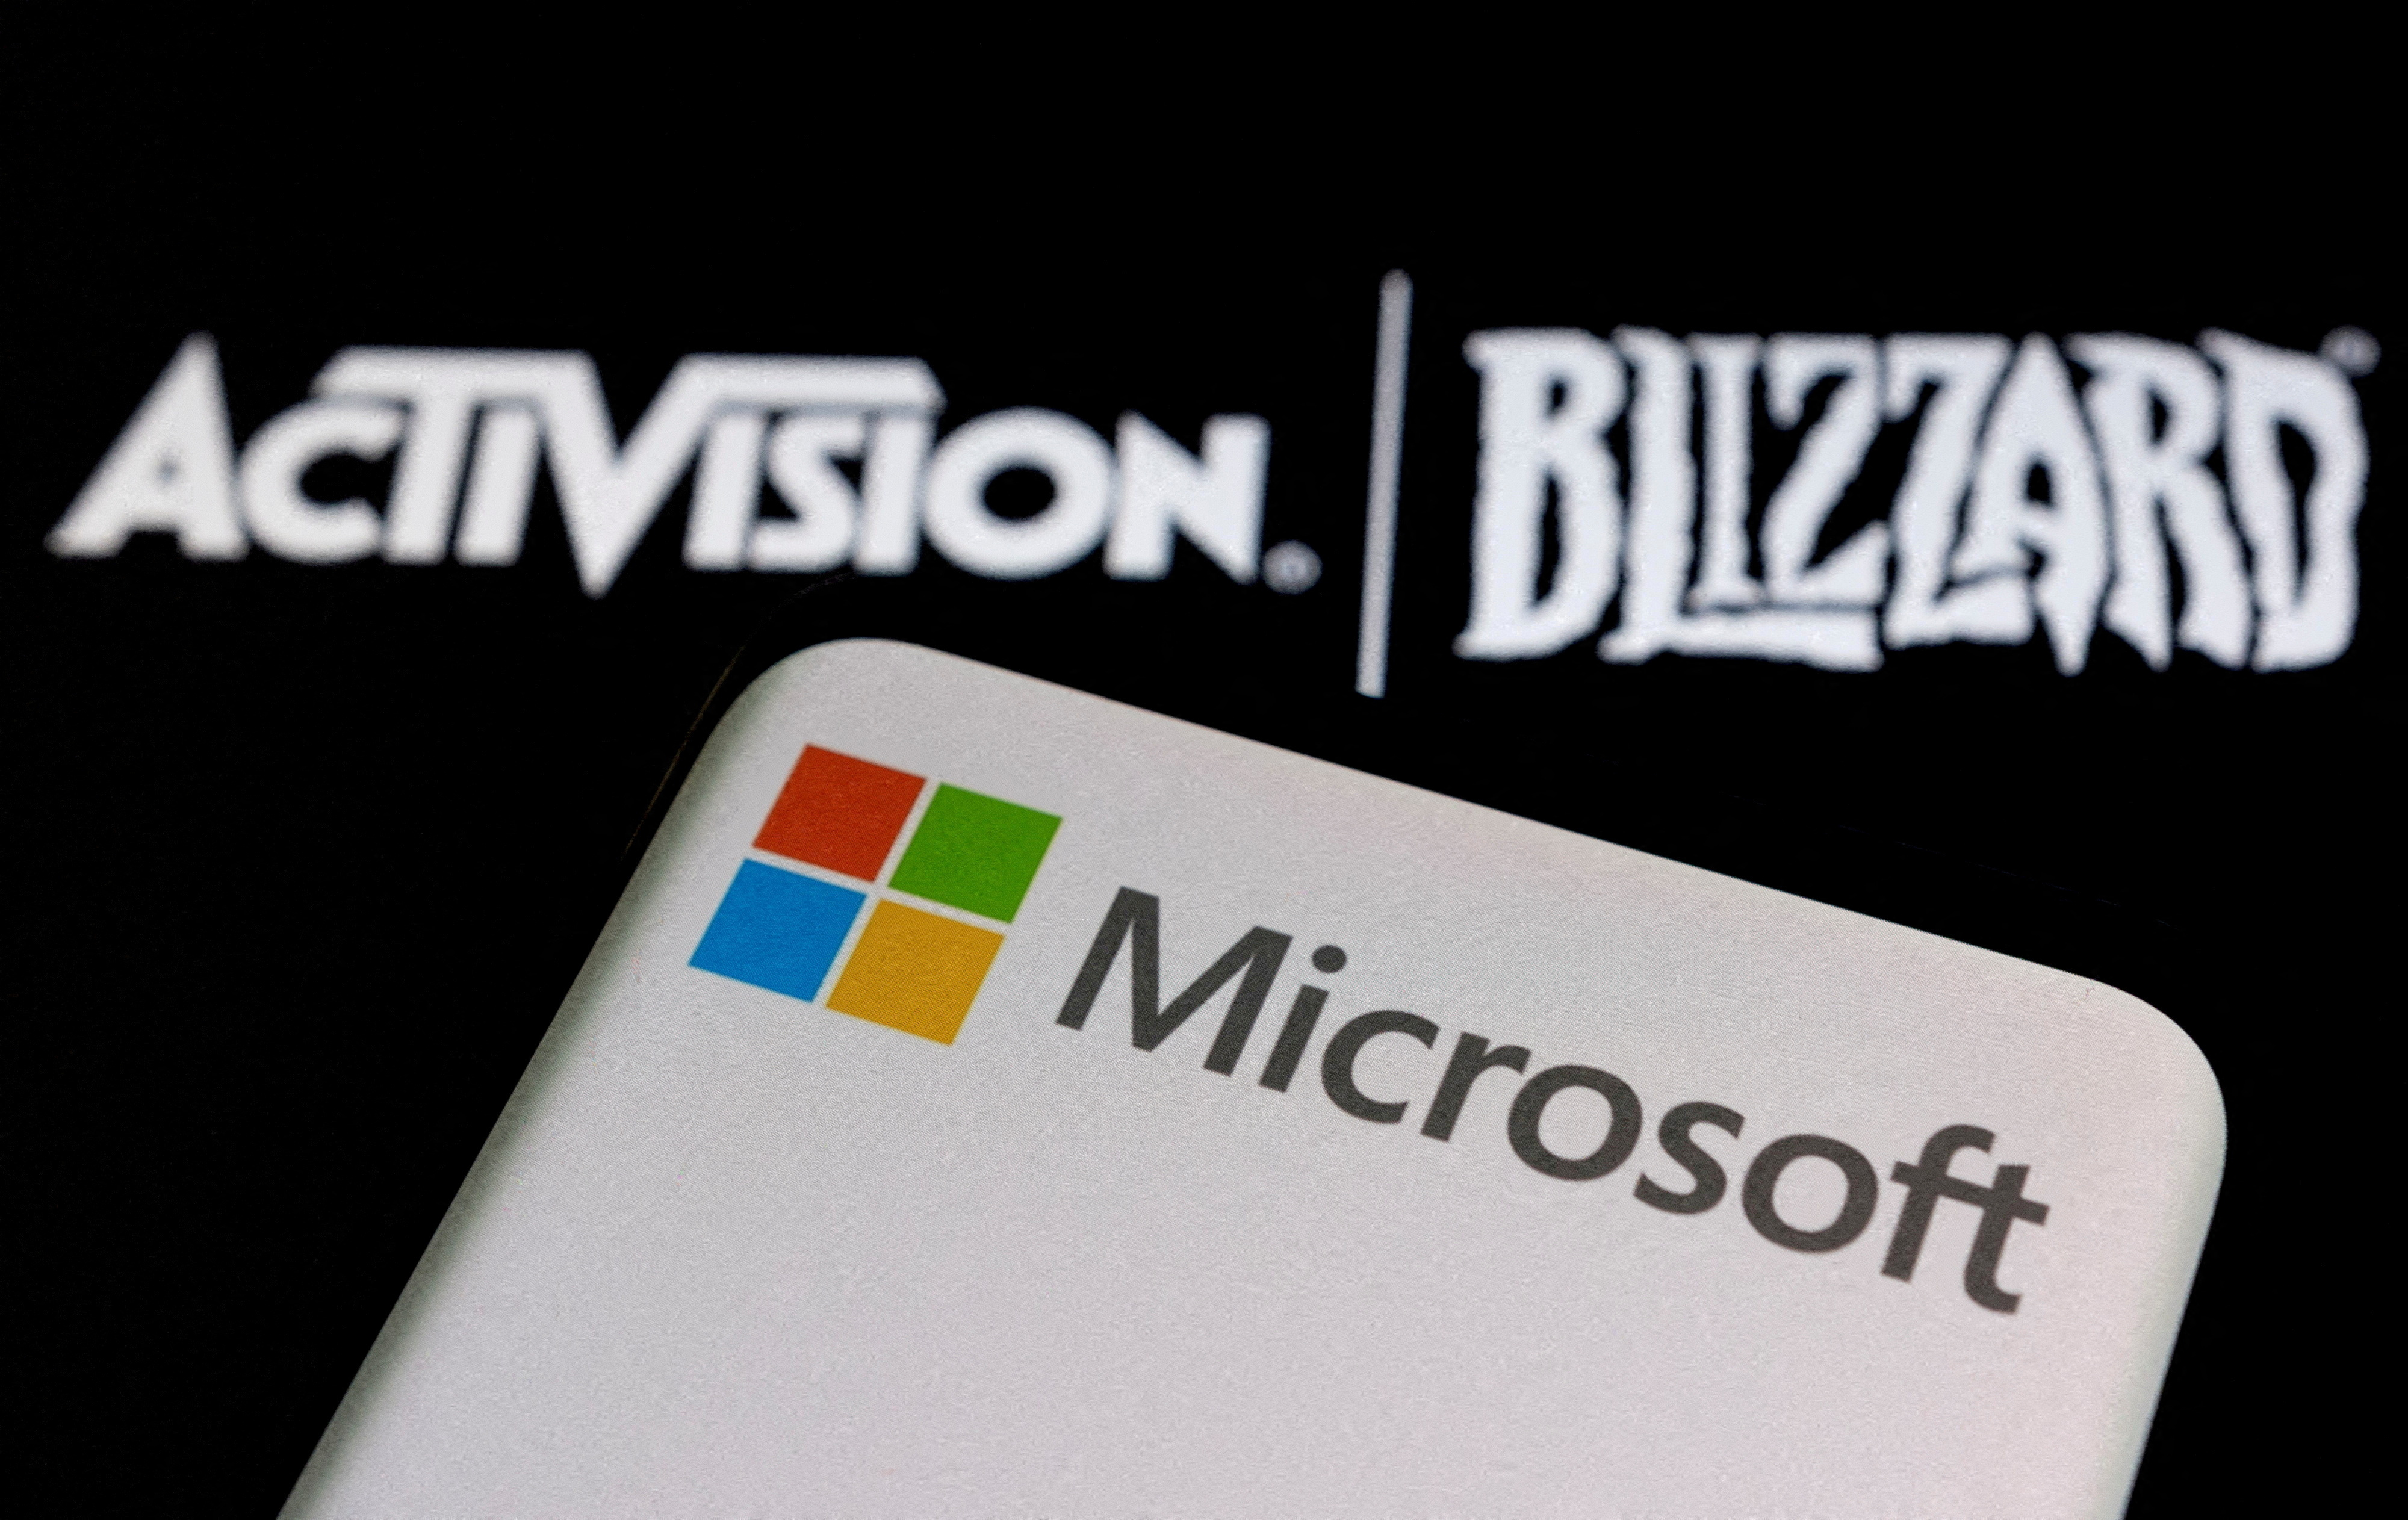 Illustration of Microsoft and Activision Blizzard logos